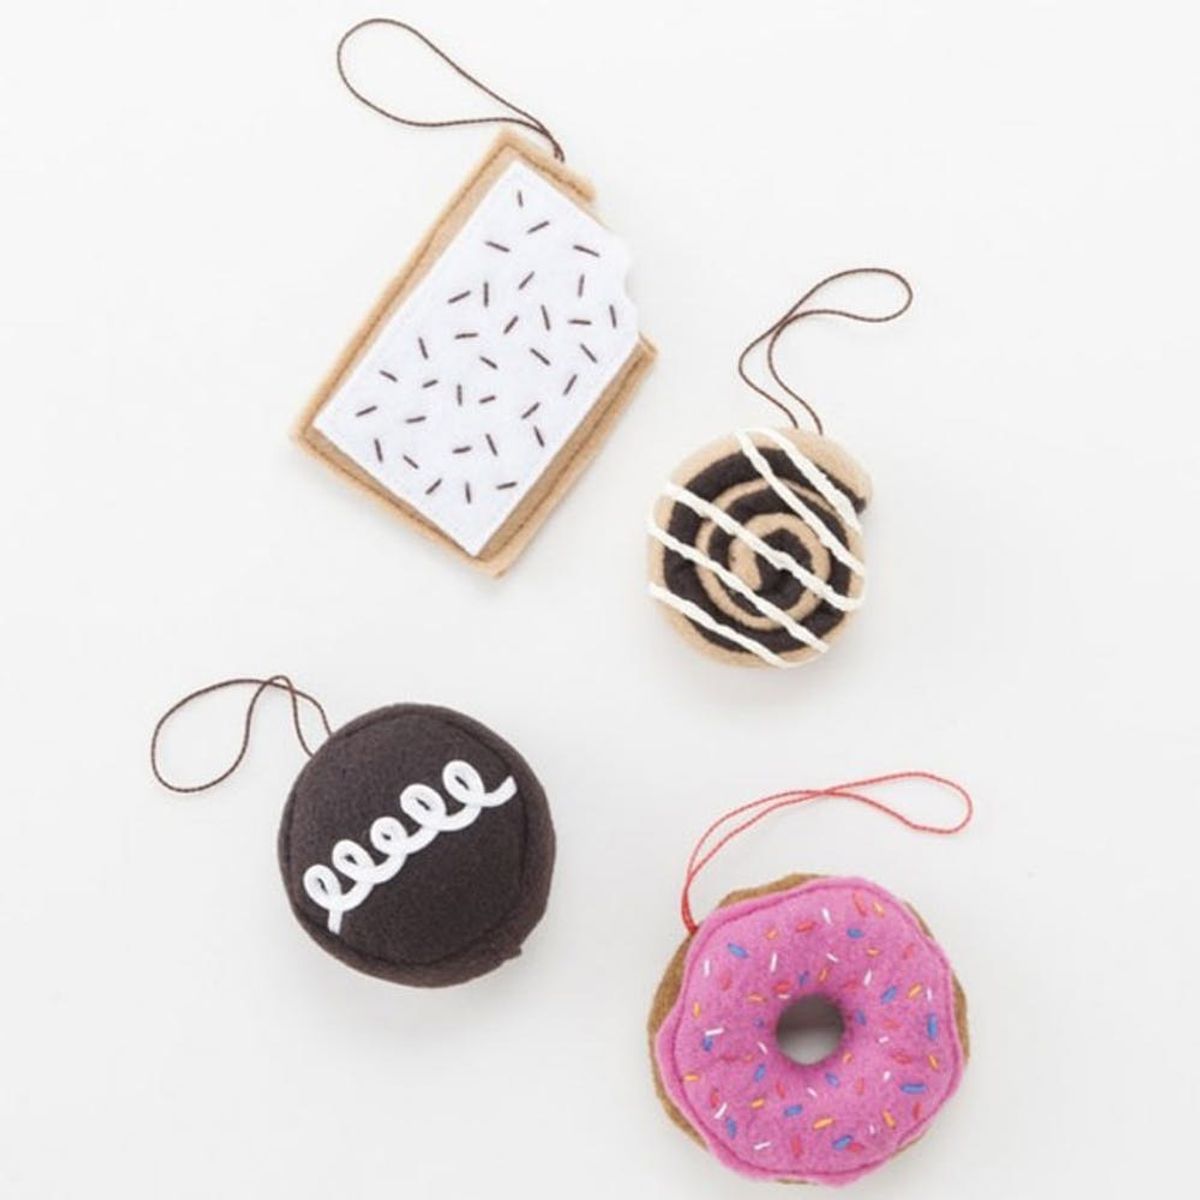 24 of the Best Christmas Tree Ornaments Ever